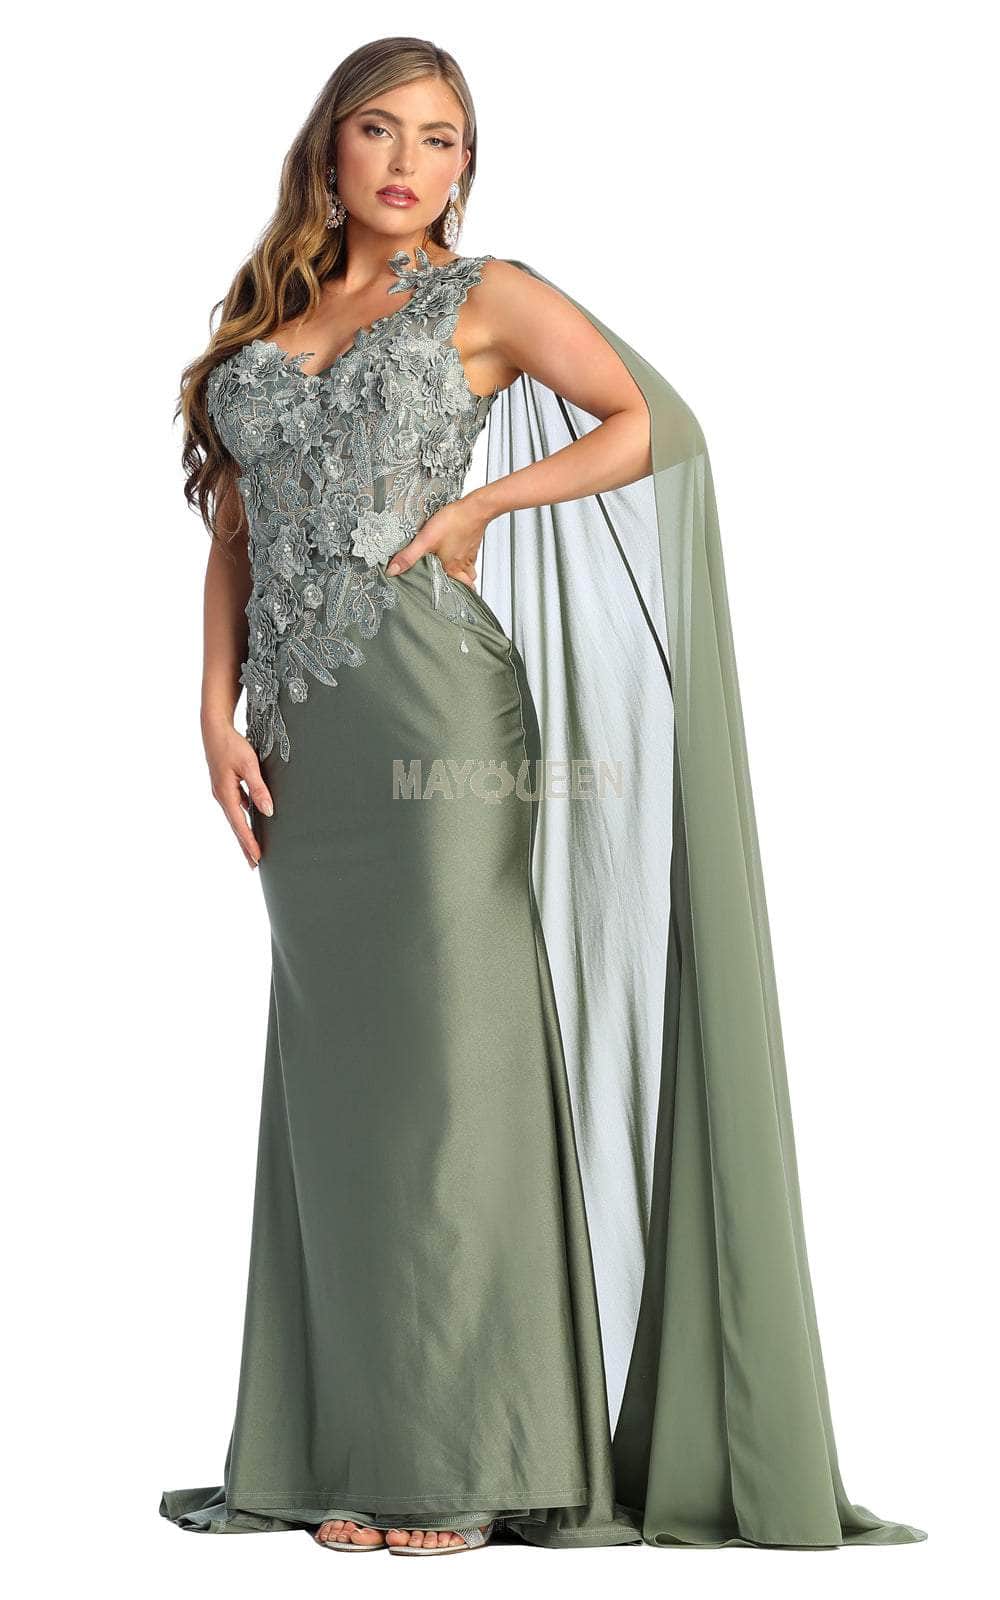 May Queen RQ7943 - Asymmetric Cape Sleeve Evening Dress Special Occasion Dress